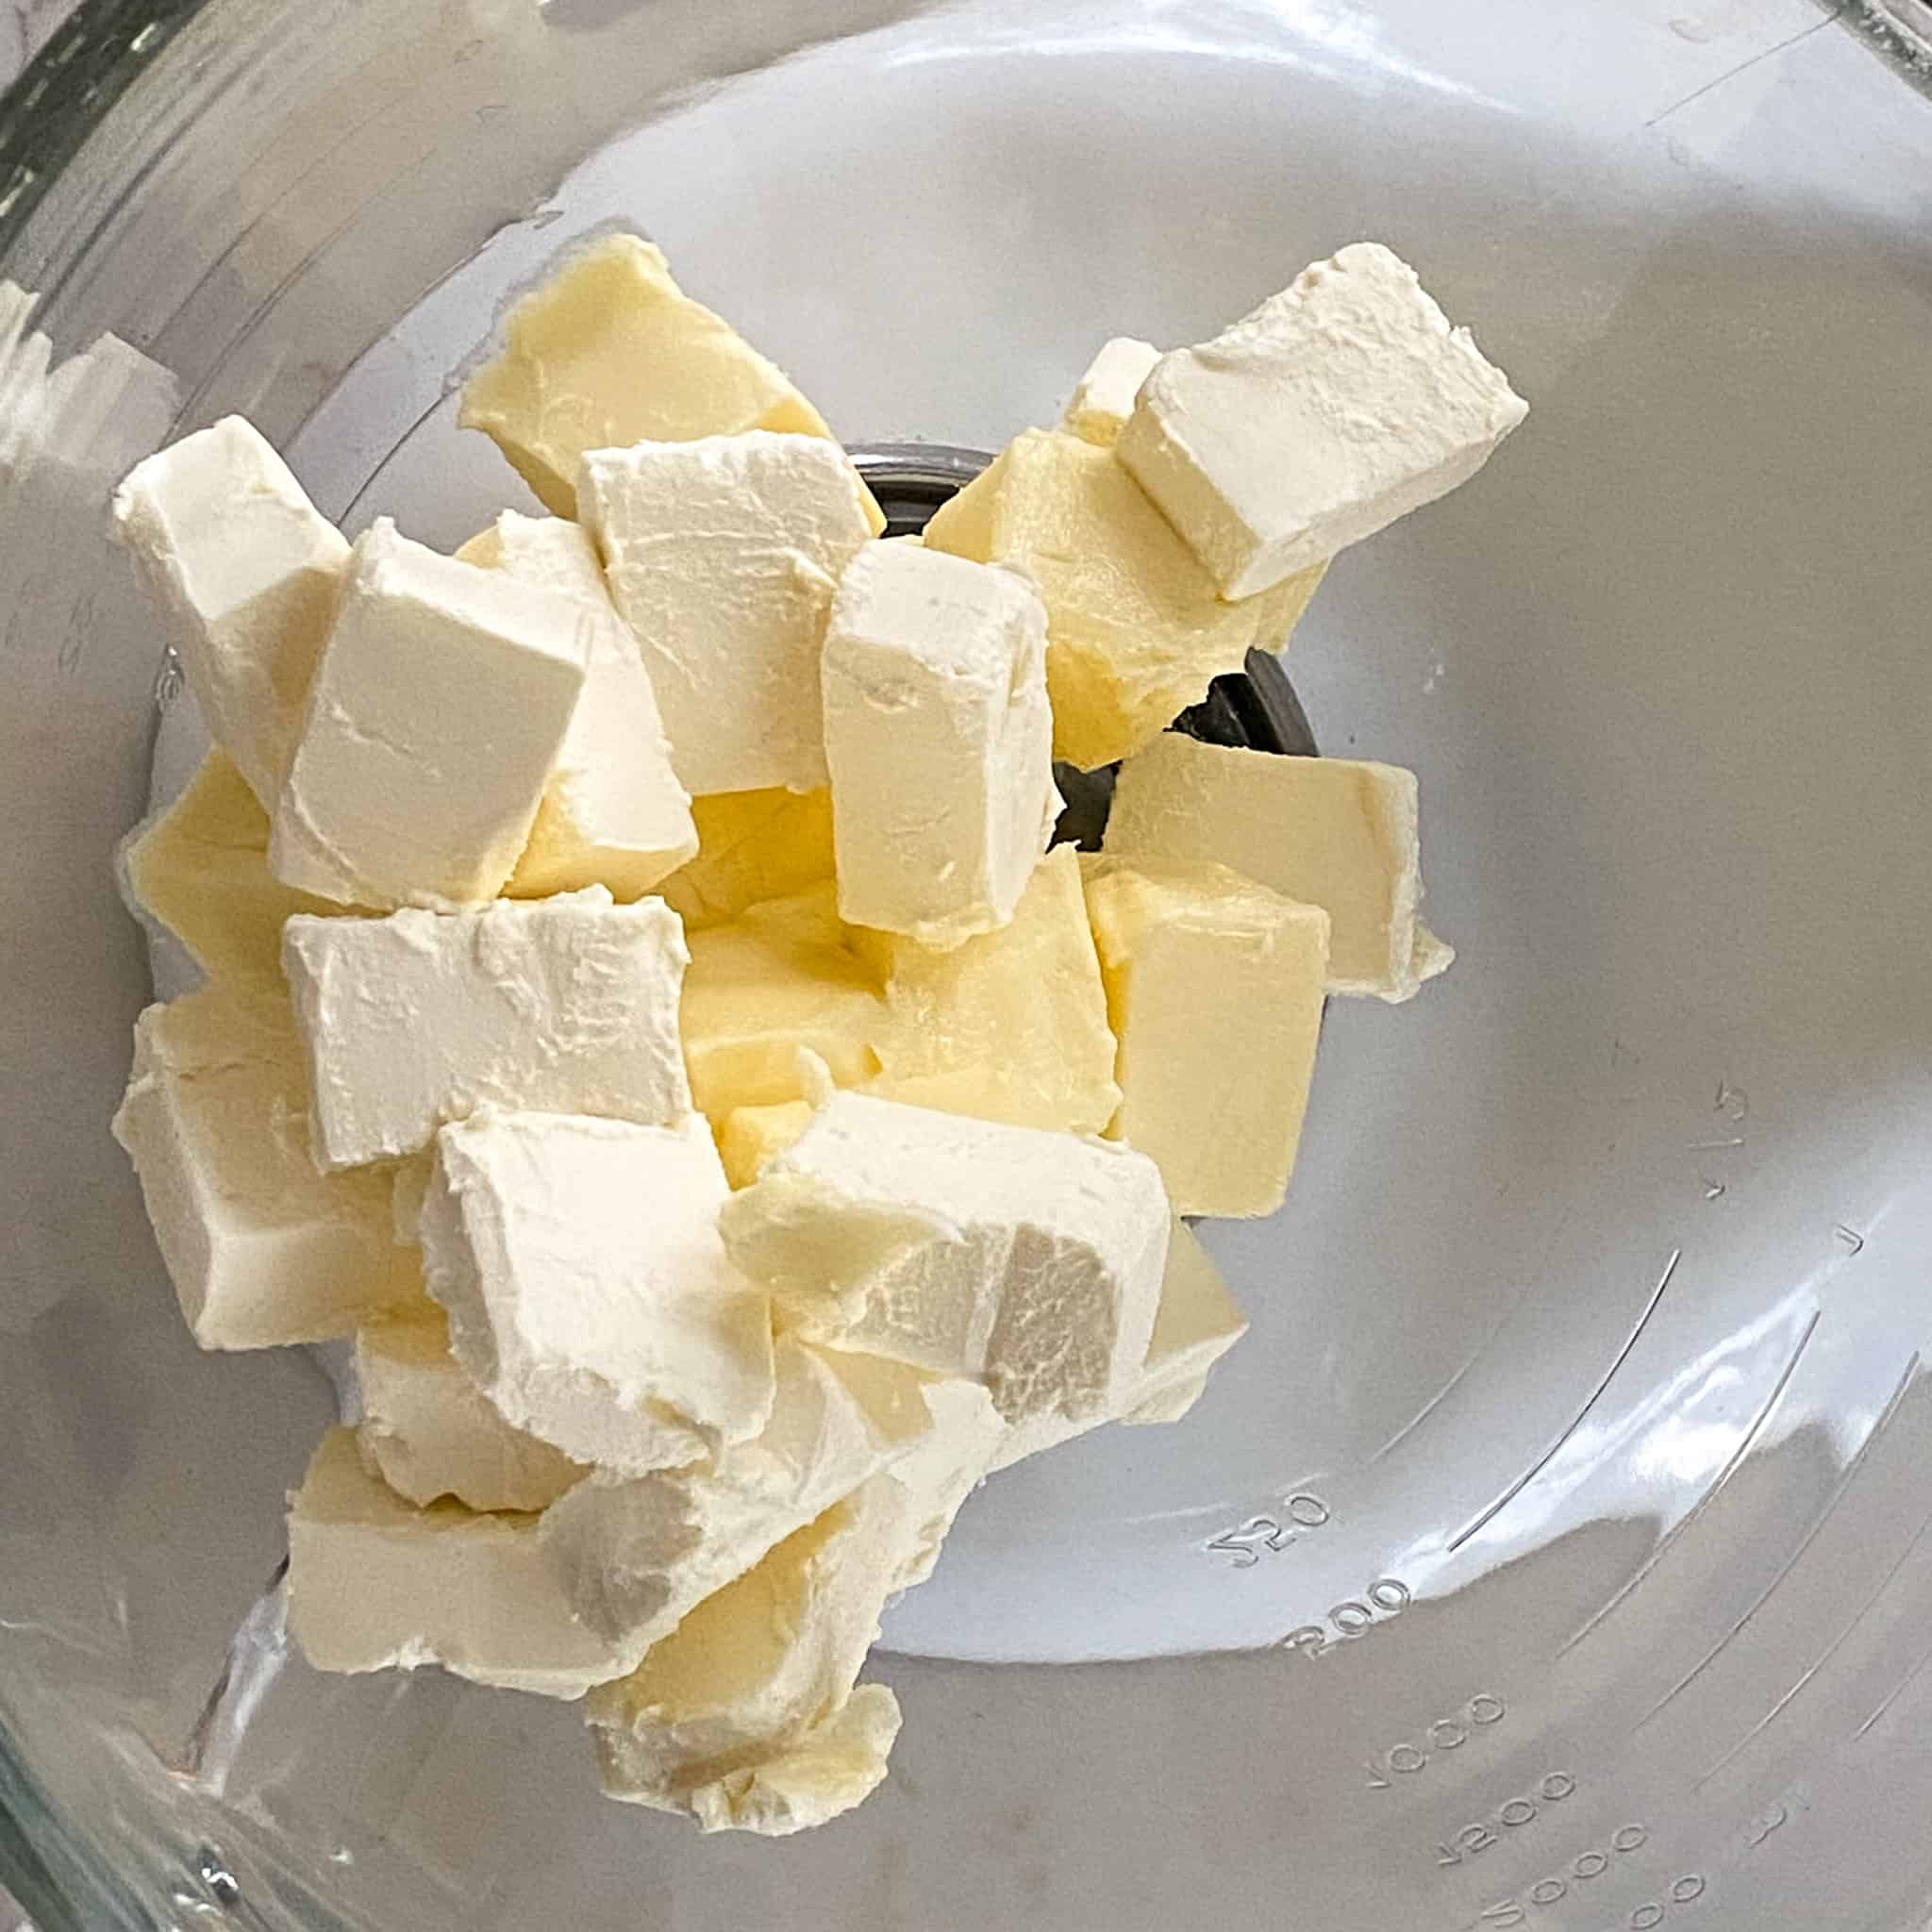 Cubed cream cheese and butter in a glass mixing bowl.